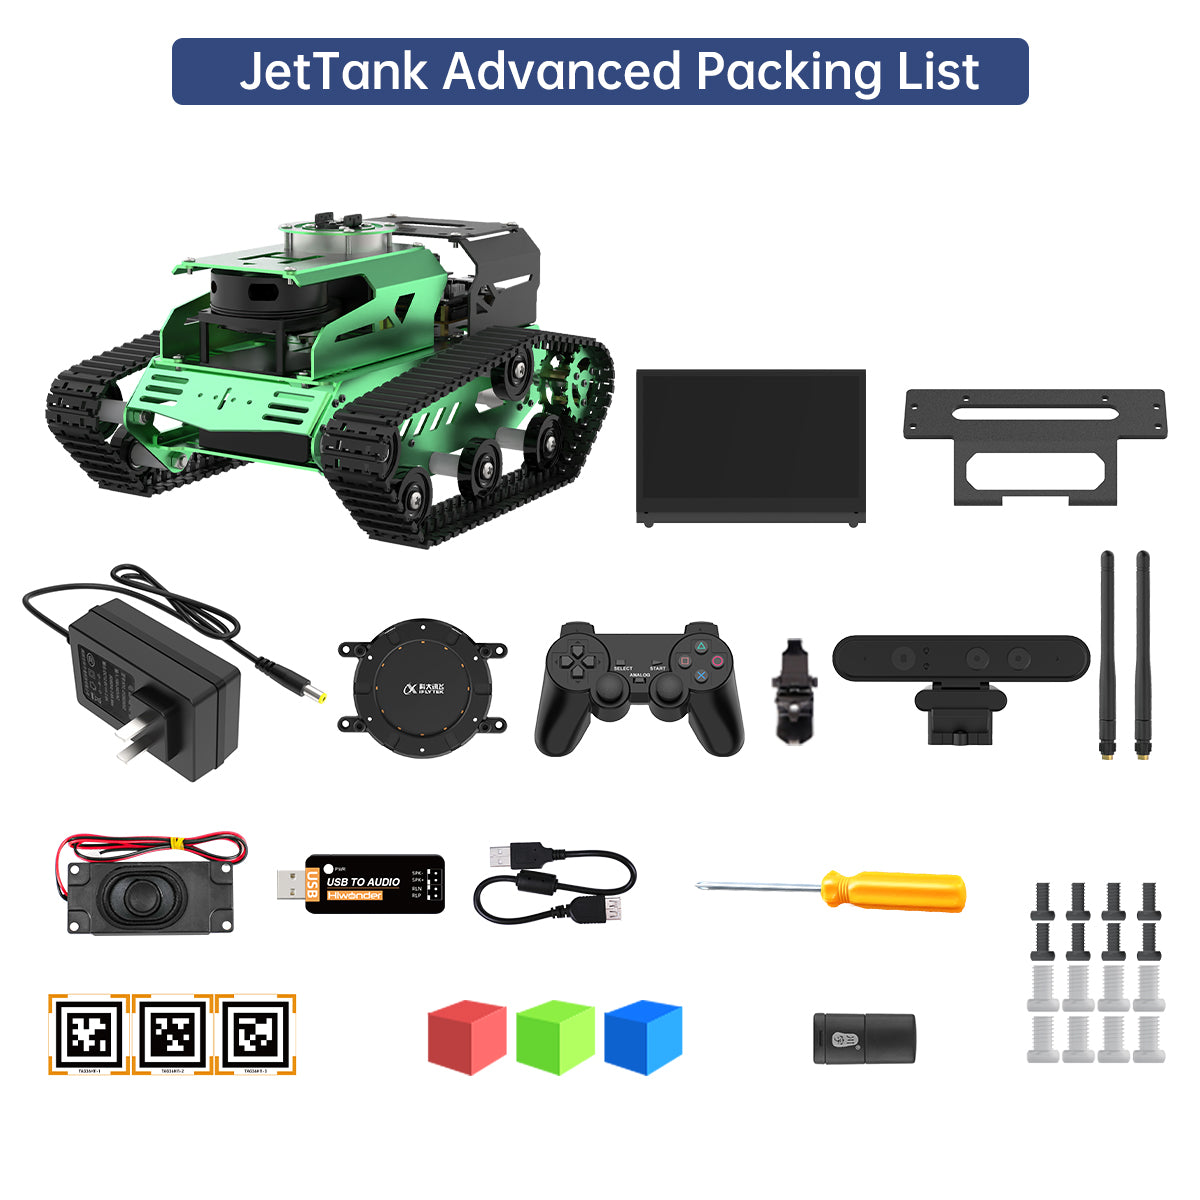 Hiwonder JetTank ROS Robot Tank Powered by Jetson Nano with Lidar Depth Camera Touch Screen, Support SLAM Mapping and Navigation